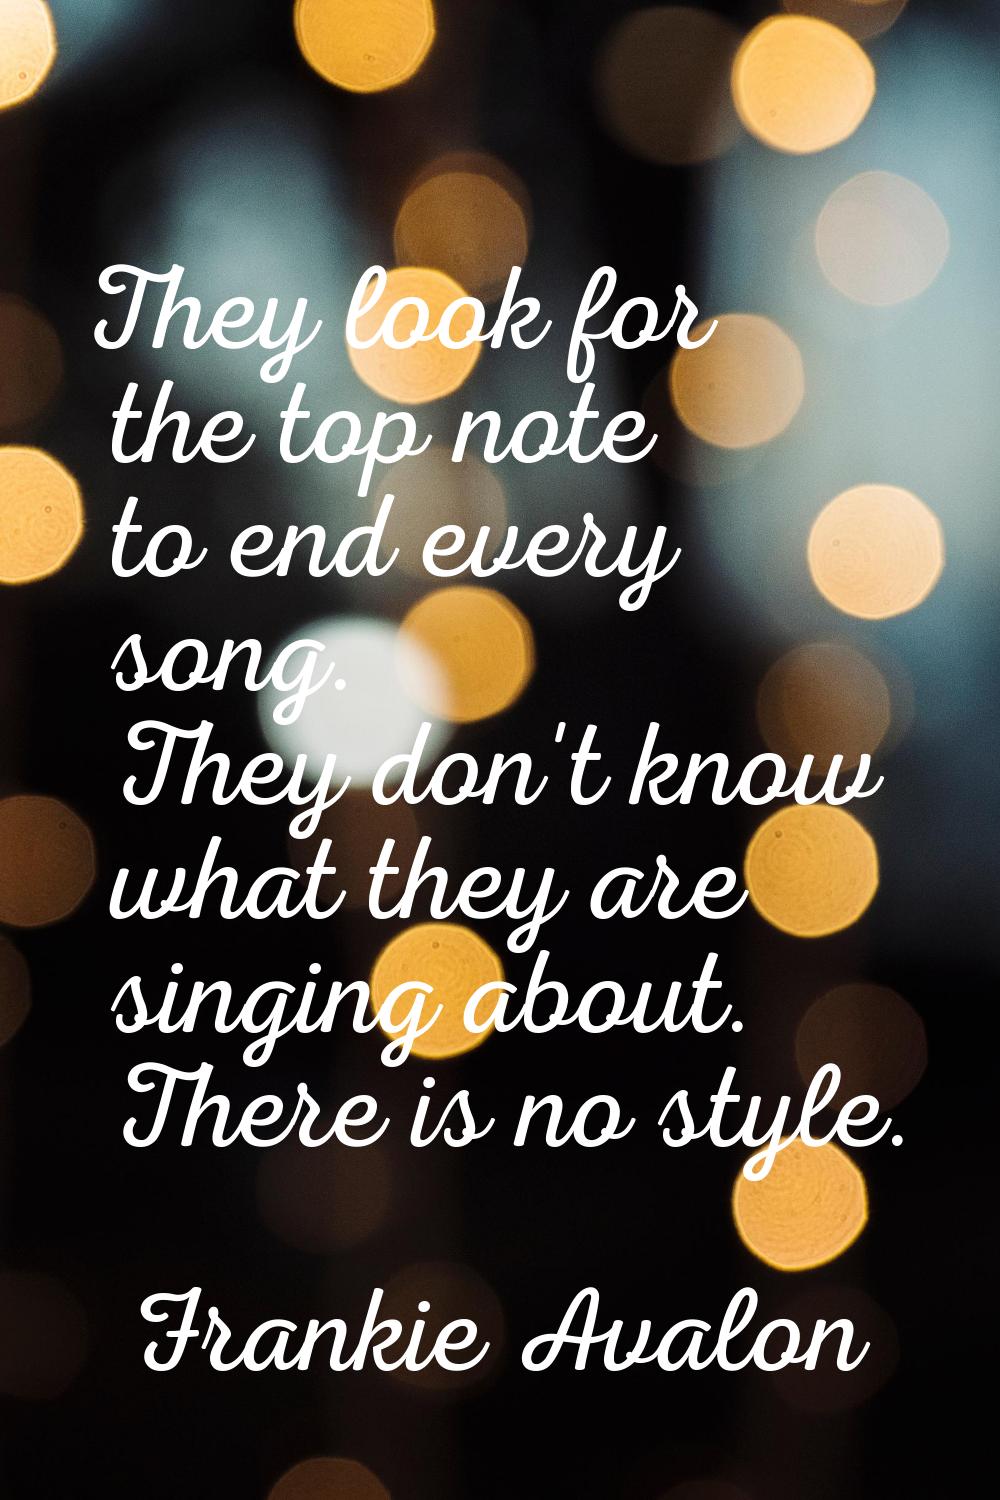 They look for the top note to end every song. They don't know what they are singing about. There is